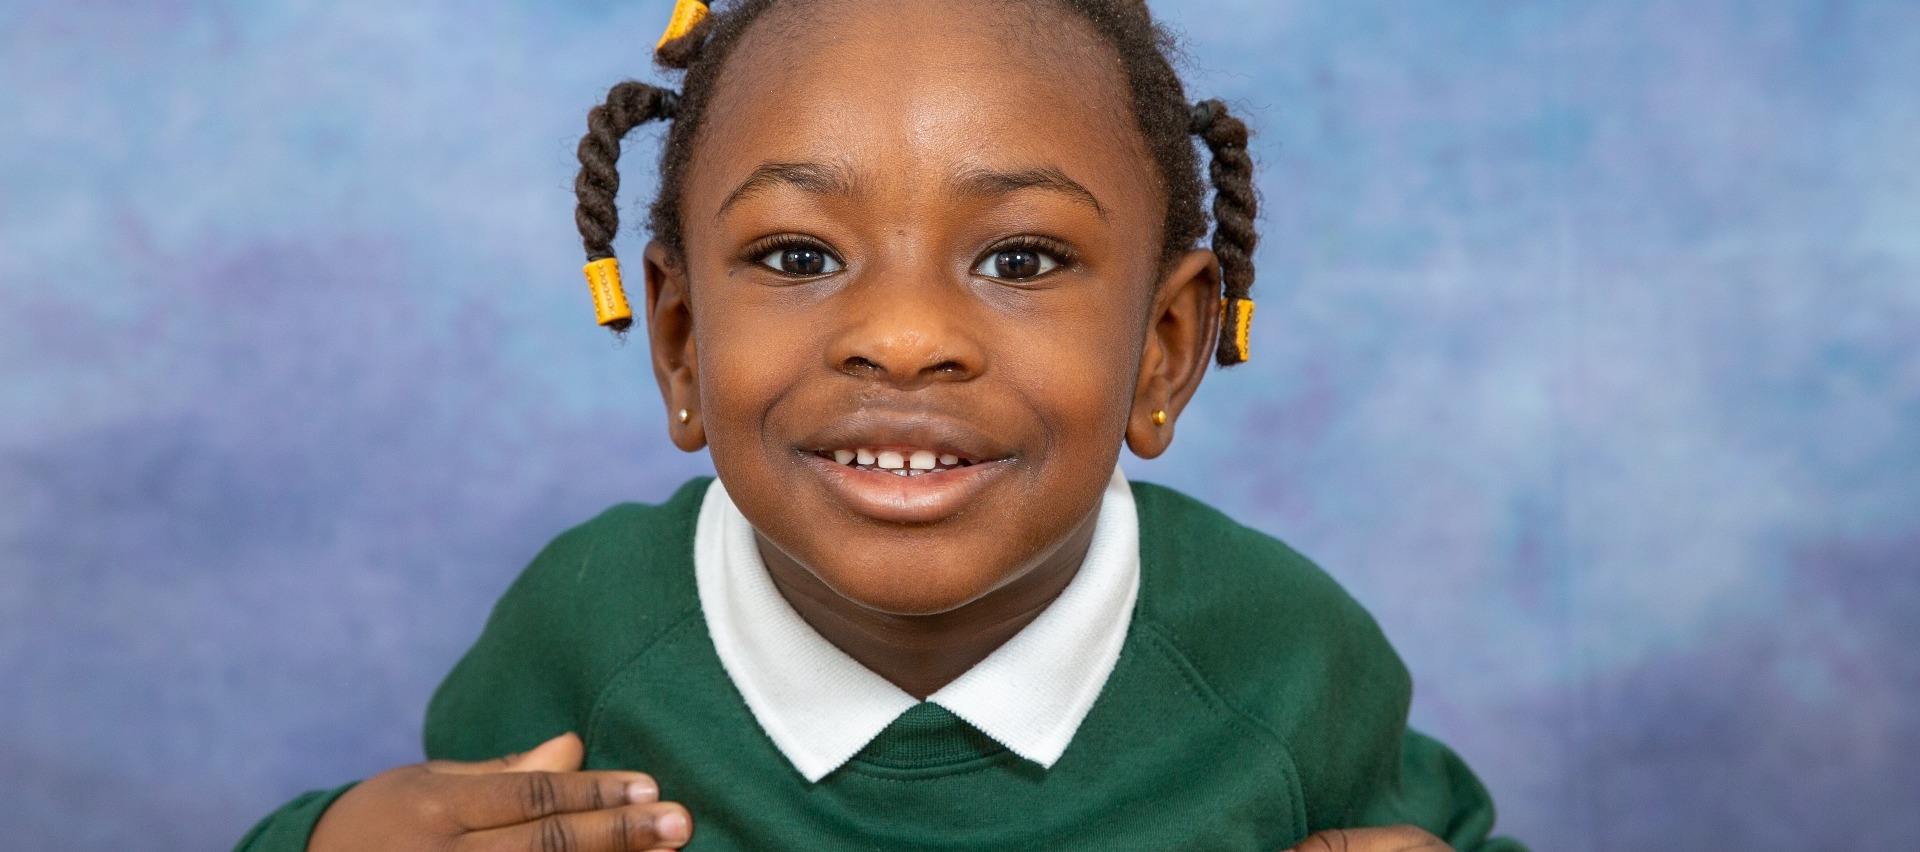 Beautiful little girl with special needs having her formal school photography session - Tiverton School, Coventry